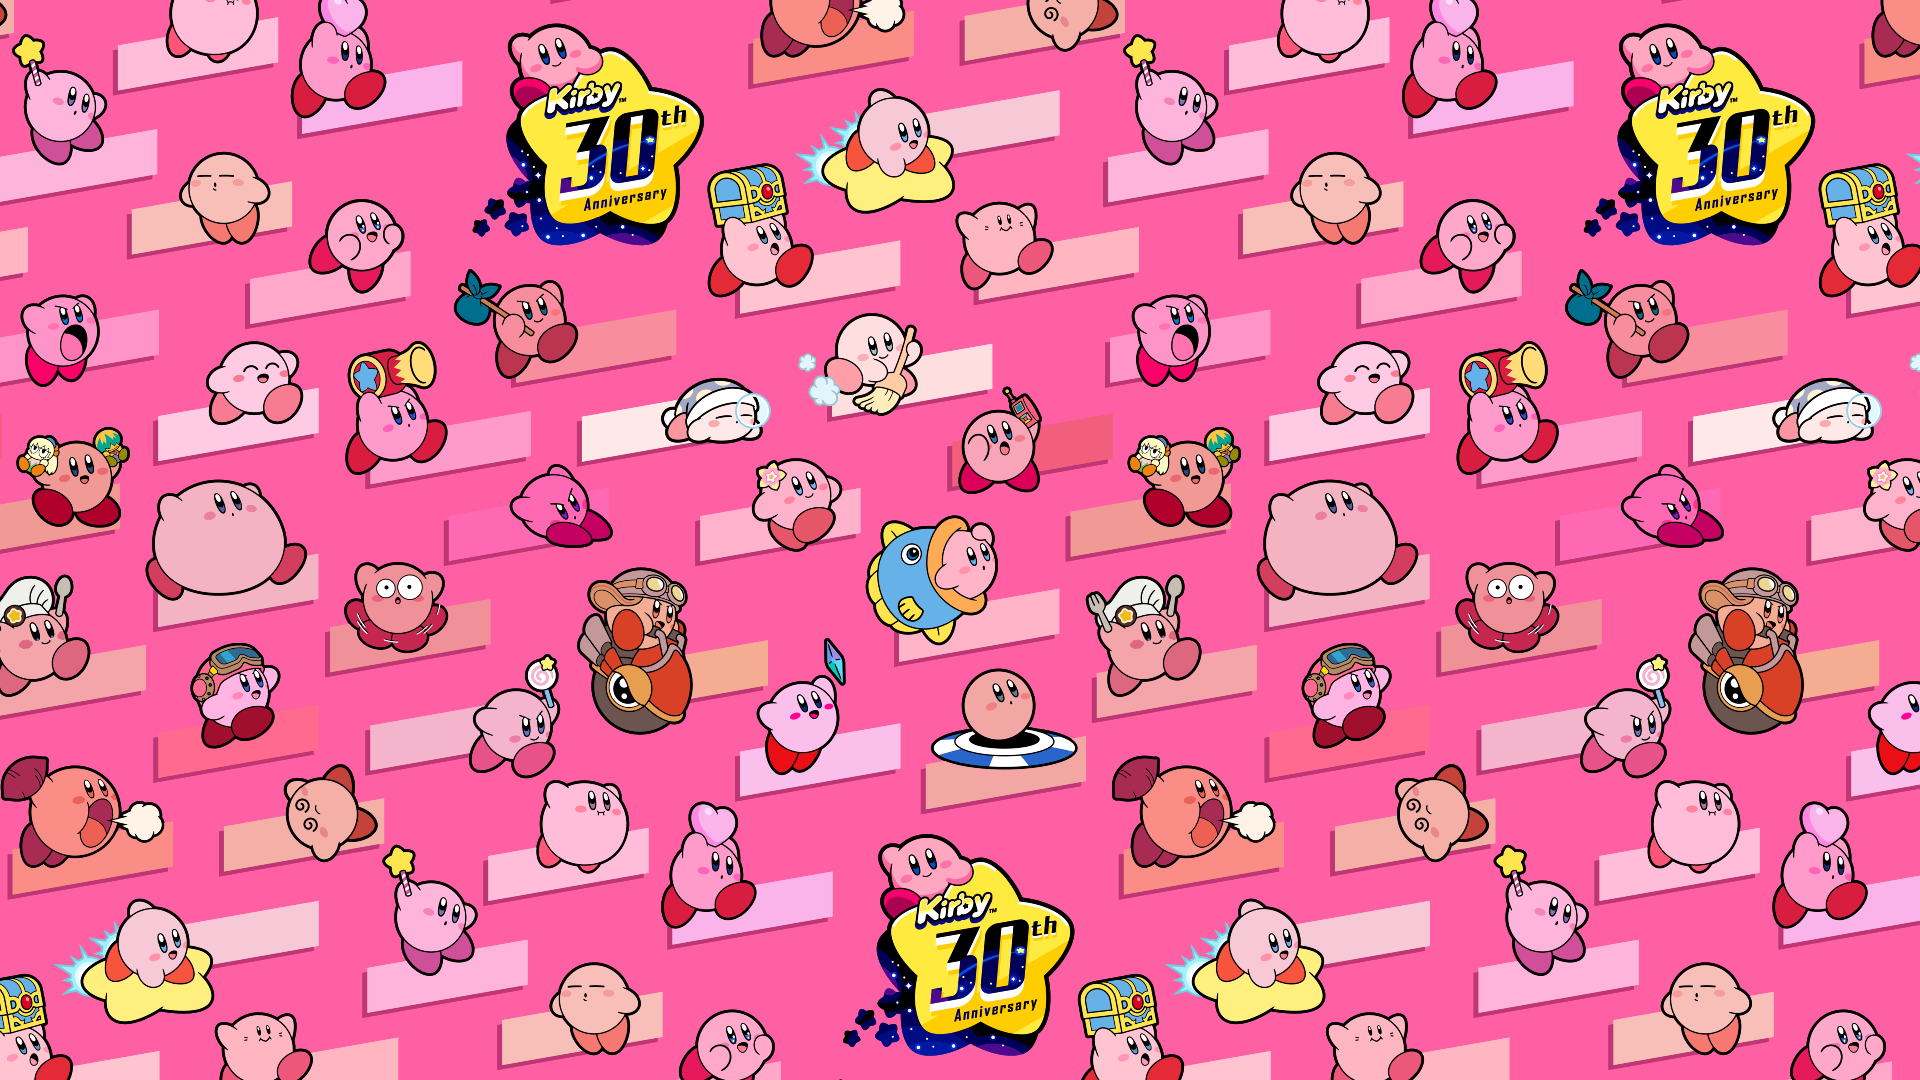 100+] Kirby Wallpapers | Wallpapers.com